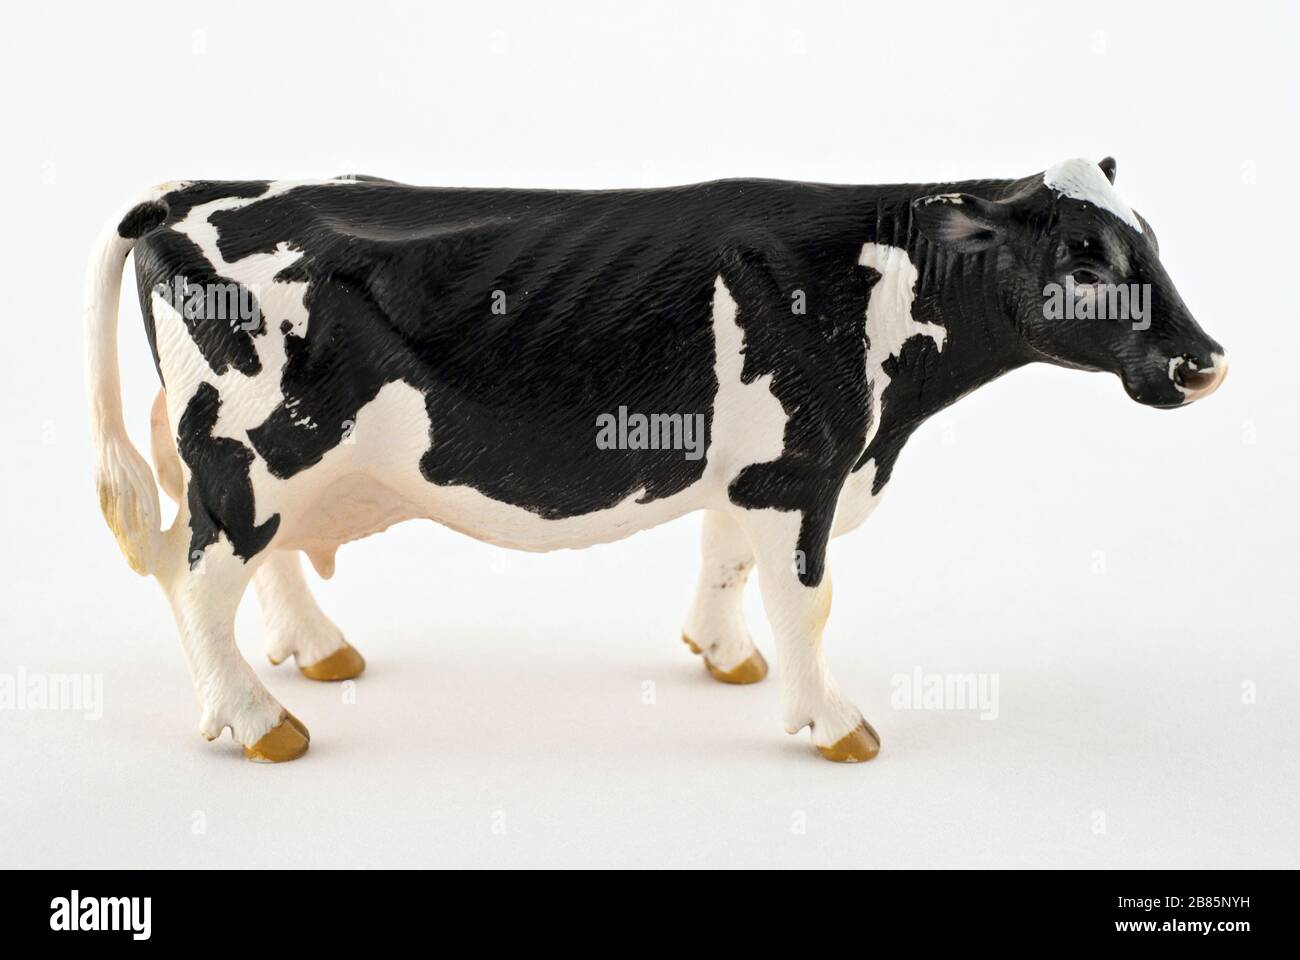 Toy cow isolated on a white background. Black and white spotted rubber or plastic  cow. Farm animals Stock Photo - Alamy